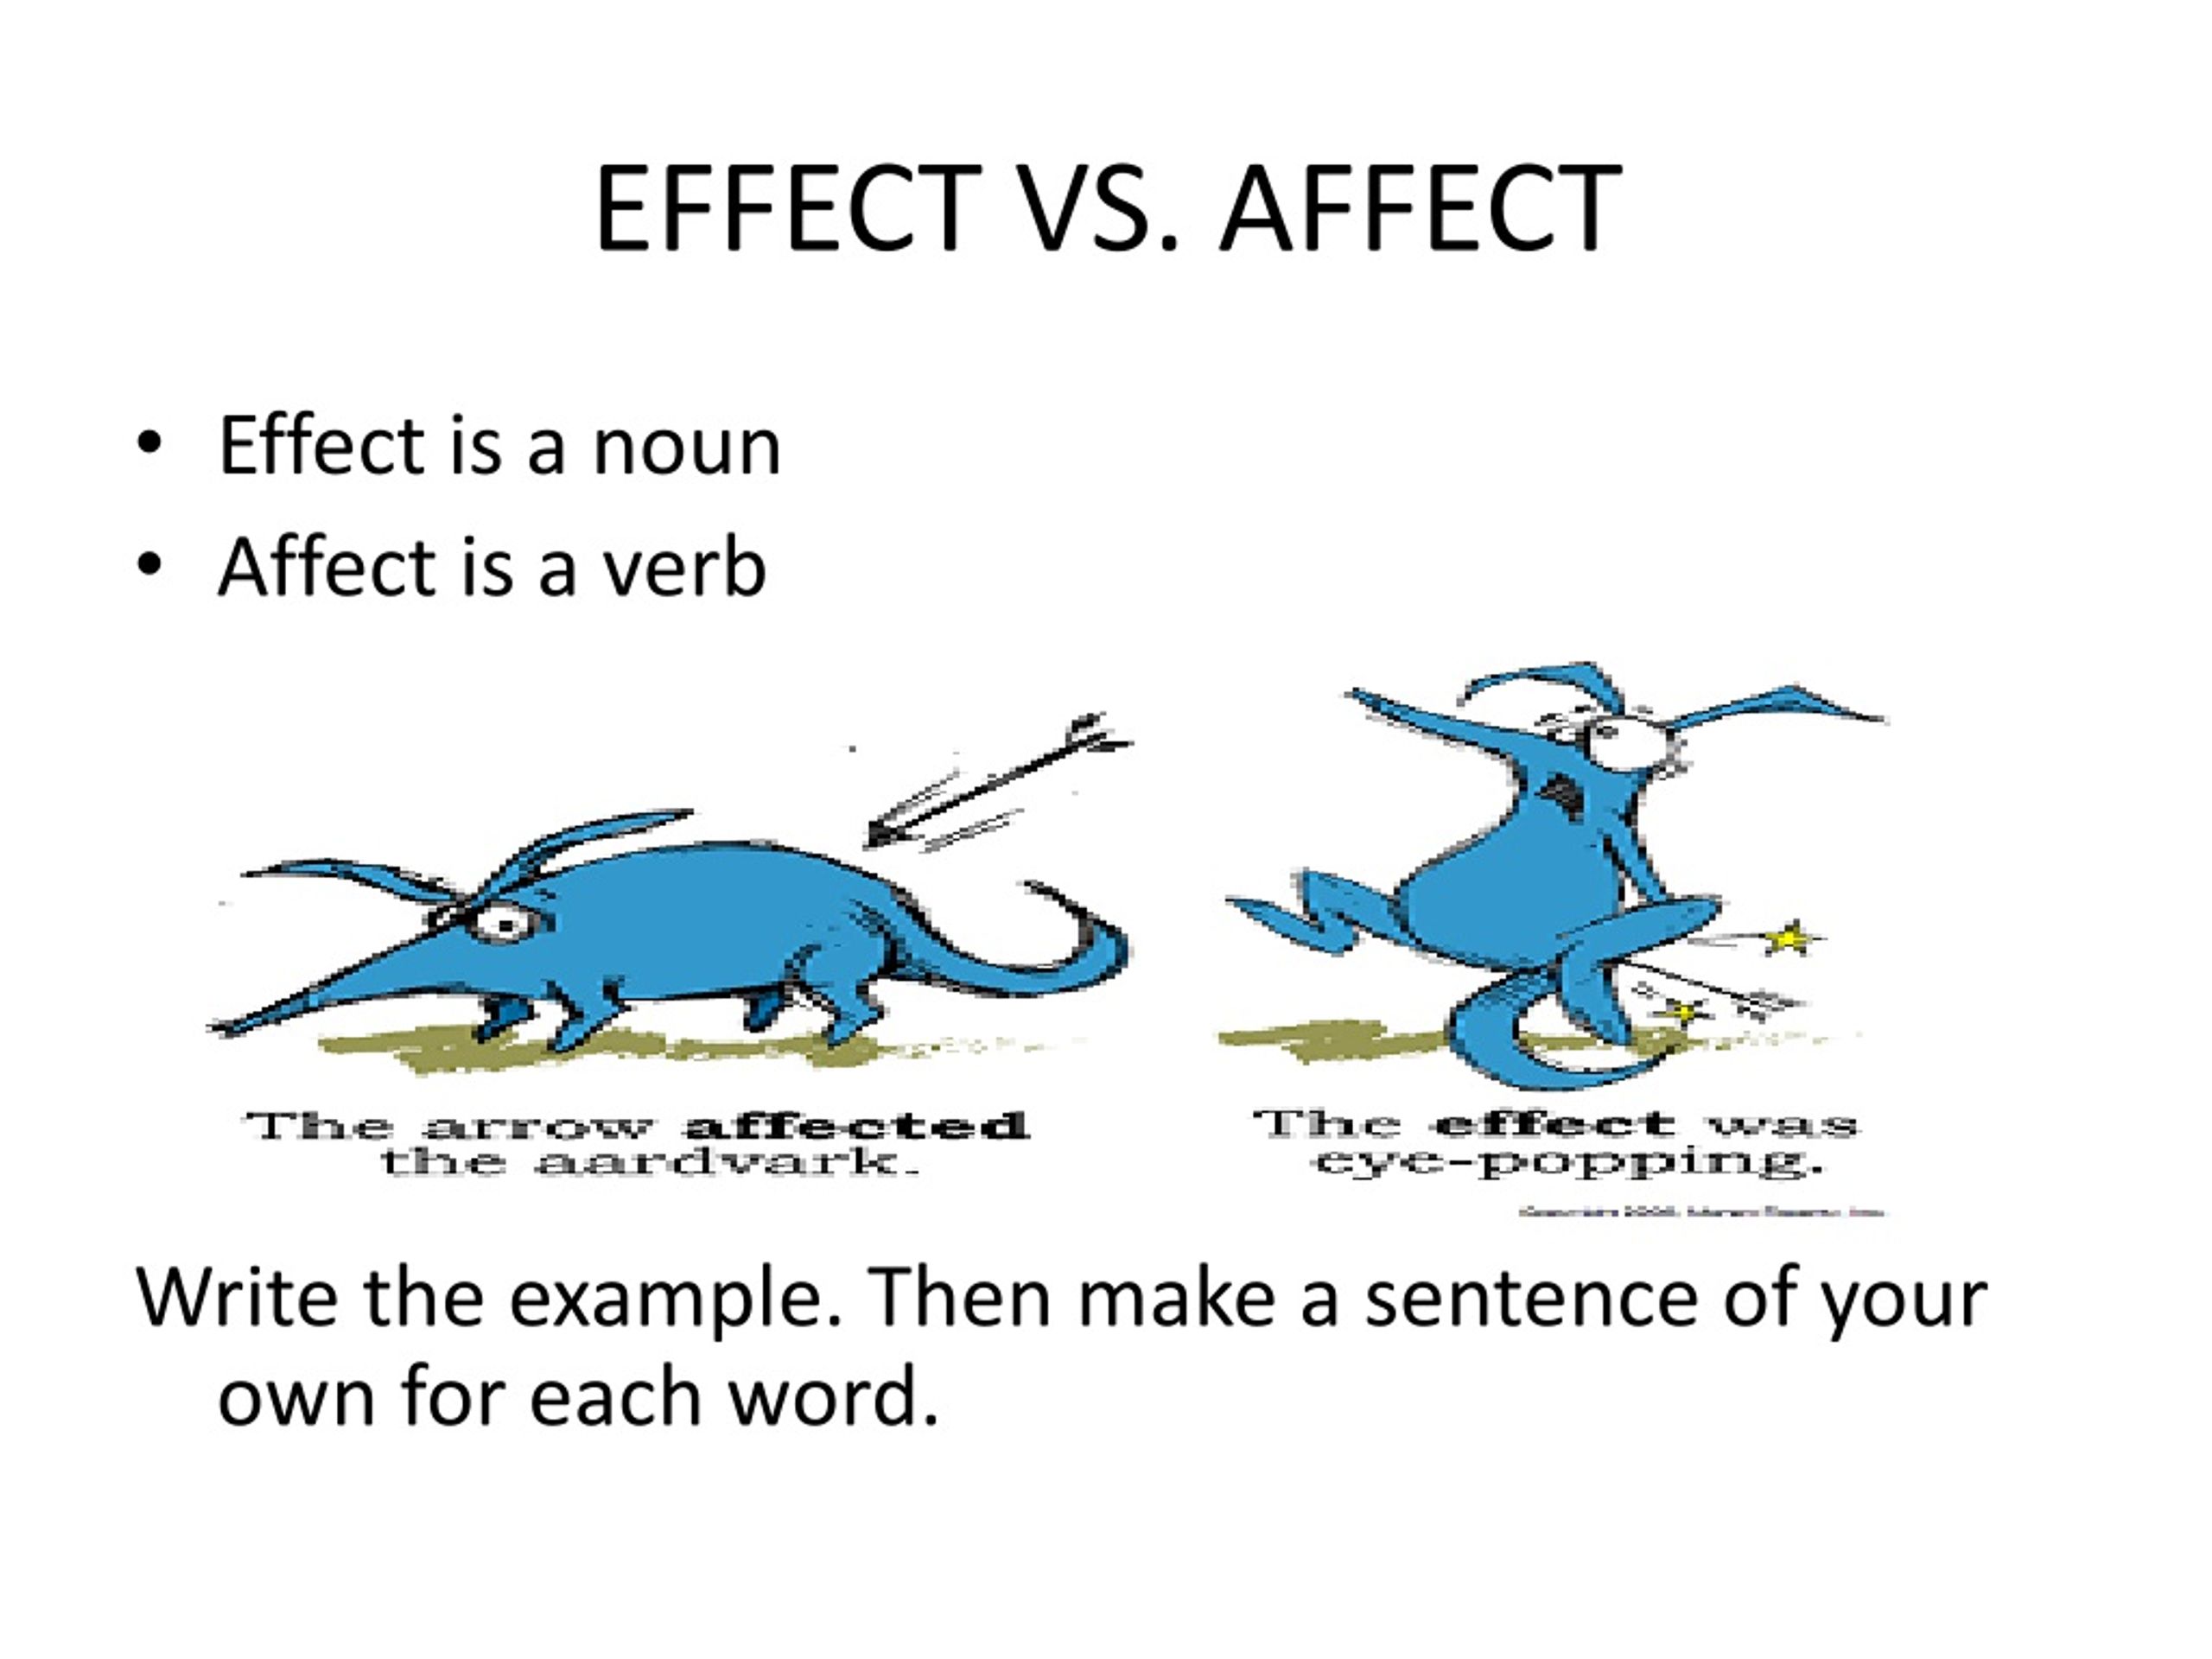 Effects effects разница. Affect Effect. Affect Effect разница. Разница слов affect Effect. Effected affected разница.